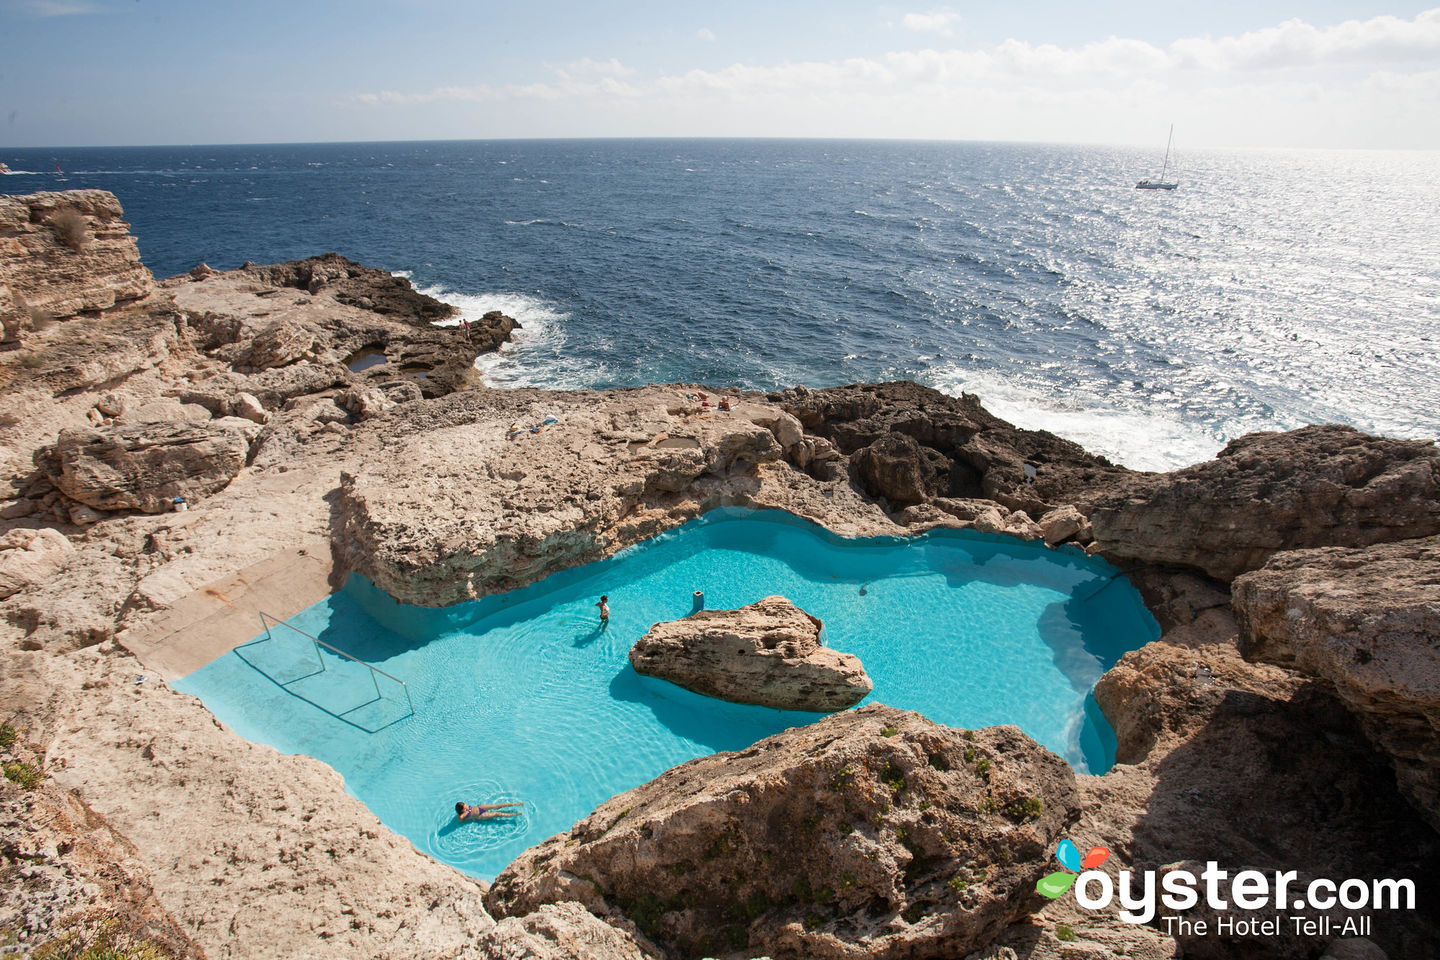 Me gusta Cuyo Eliminación Roc Suites Las Rocas Review: What To REALLY Expect If You Stay